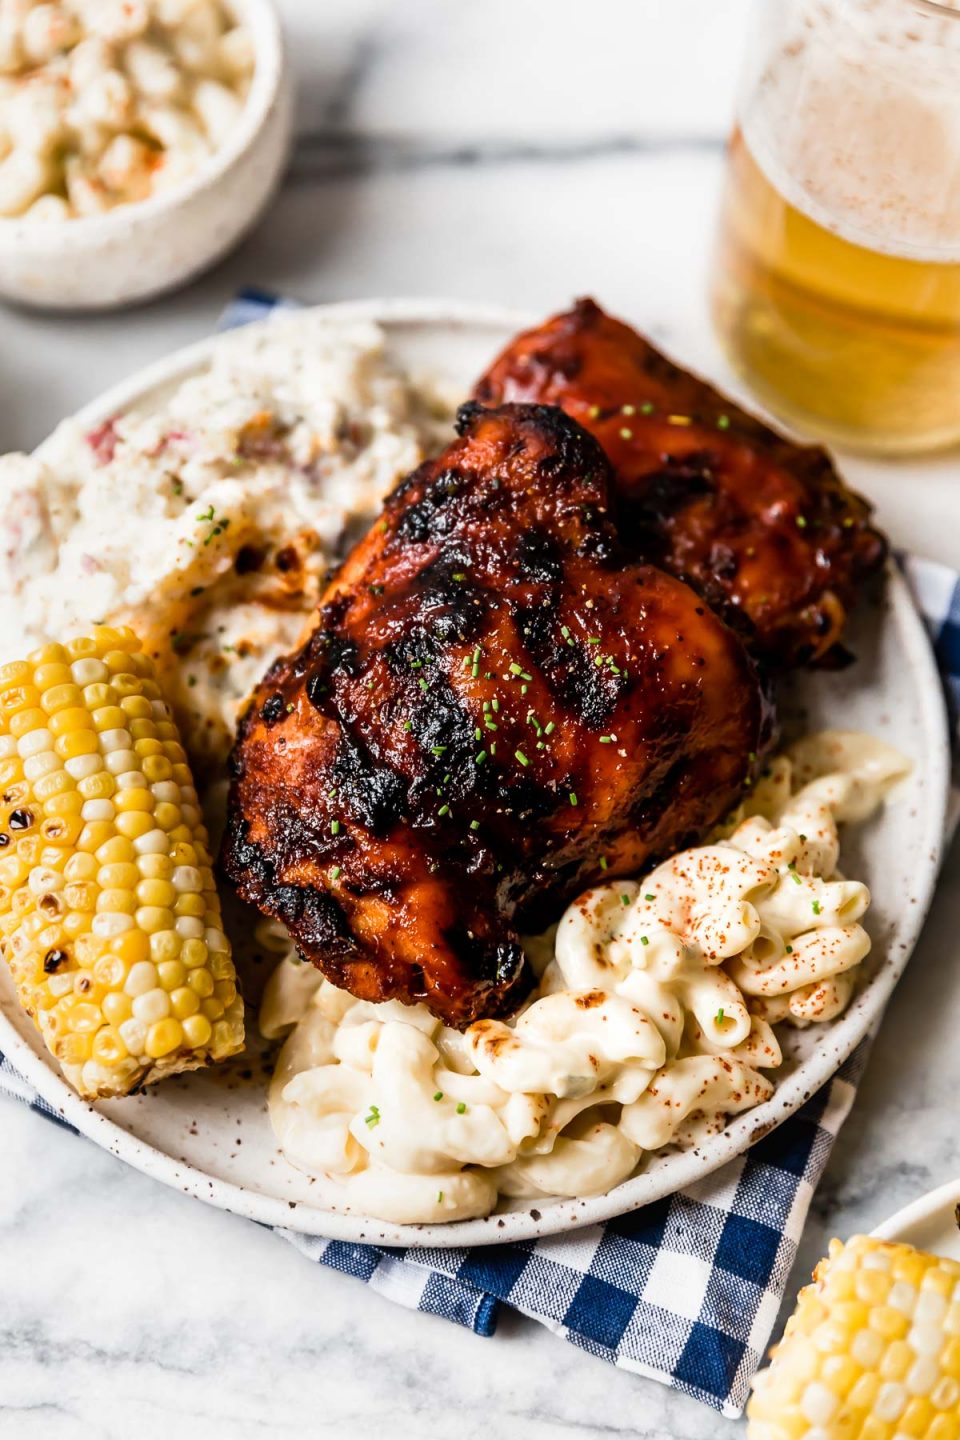 Grilled BBQ chicken on a plate with macaroni salad, potato salad, and corn on the cob. The plate is surrounded by more side dishes, extra sauce & a glass of beer.